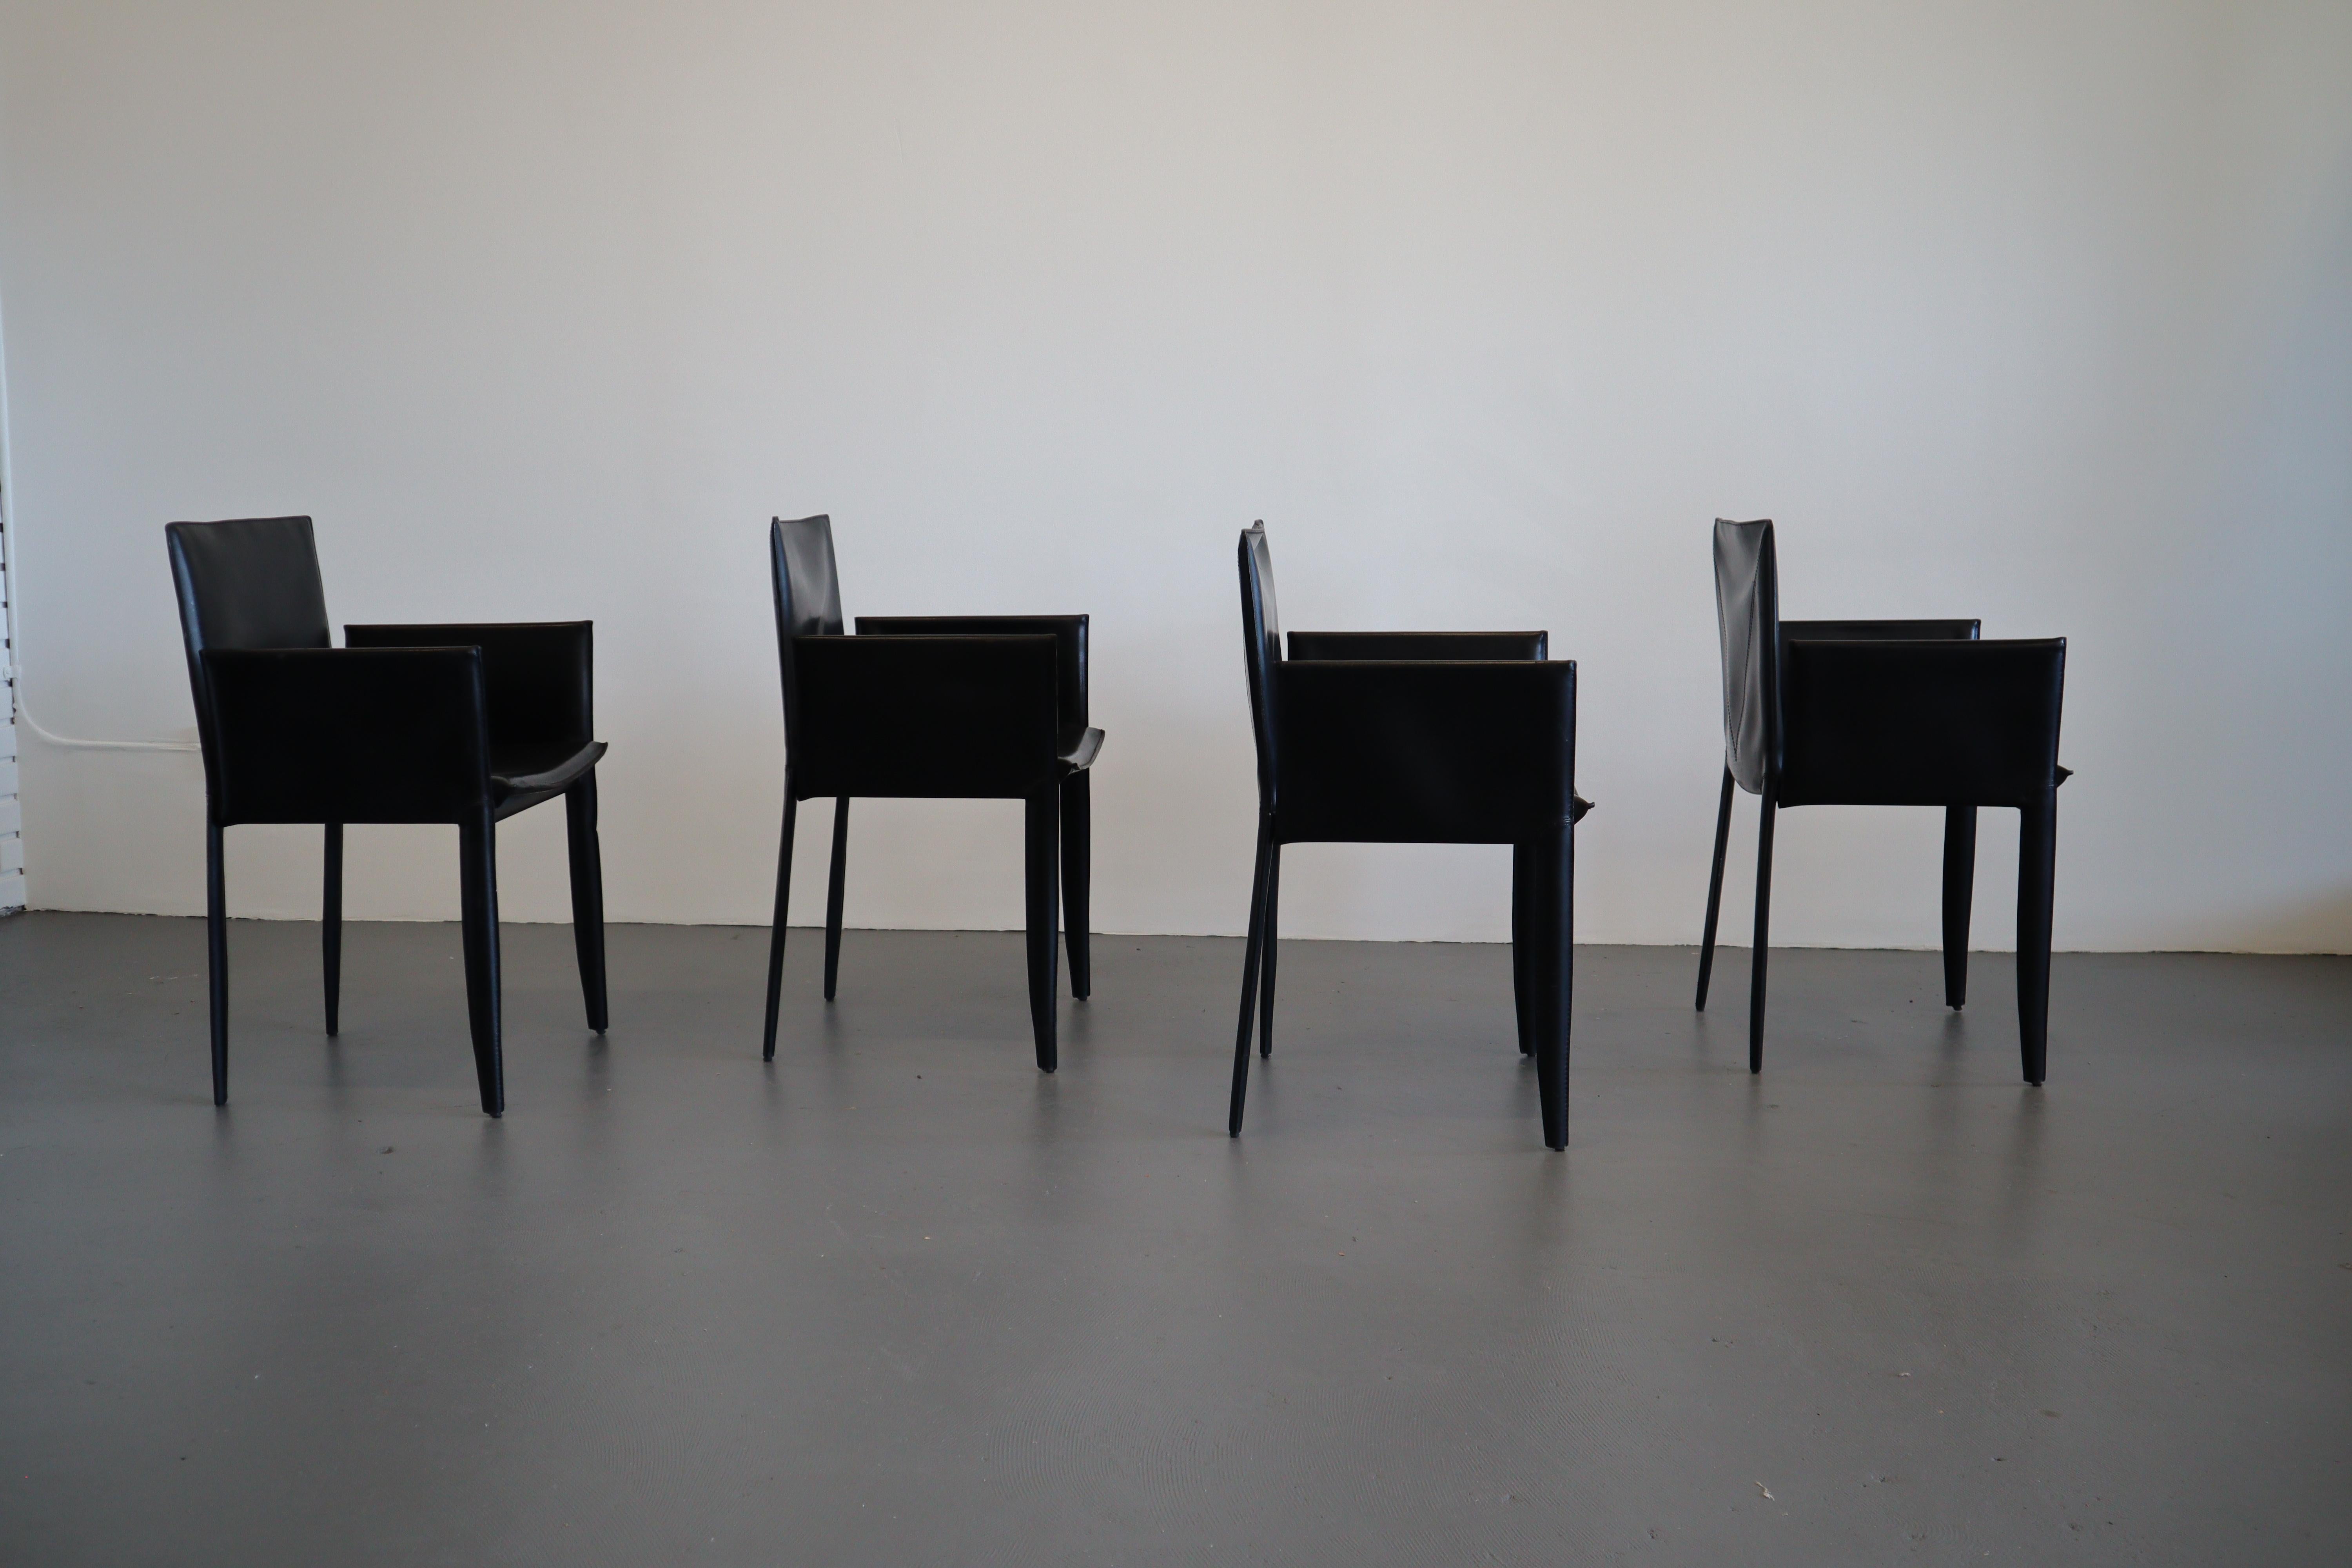 A set of four modernist Italian leather dining chairs by Cattelan Italia. Beautifully made with supple black leather and detailed stitching. Elegant and refined design that is a compliment to most styles. Set of harder to find armchairs in great